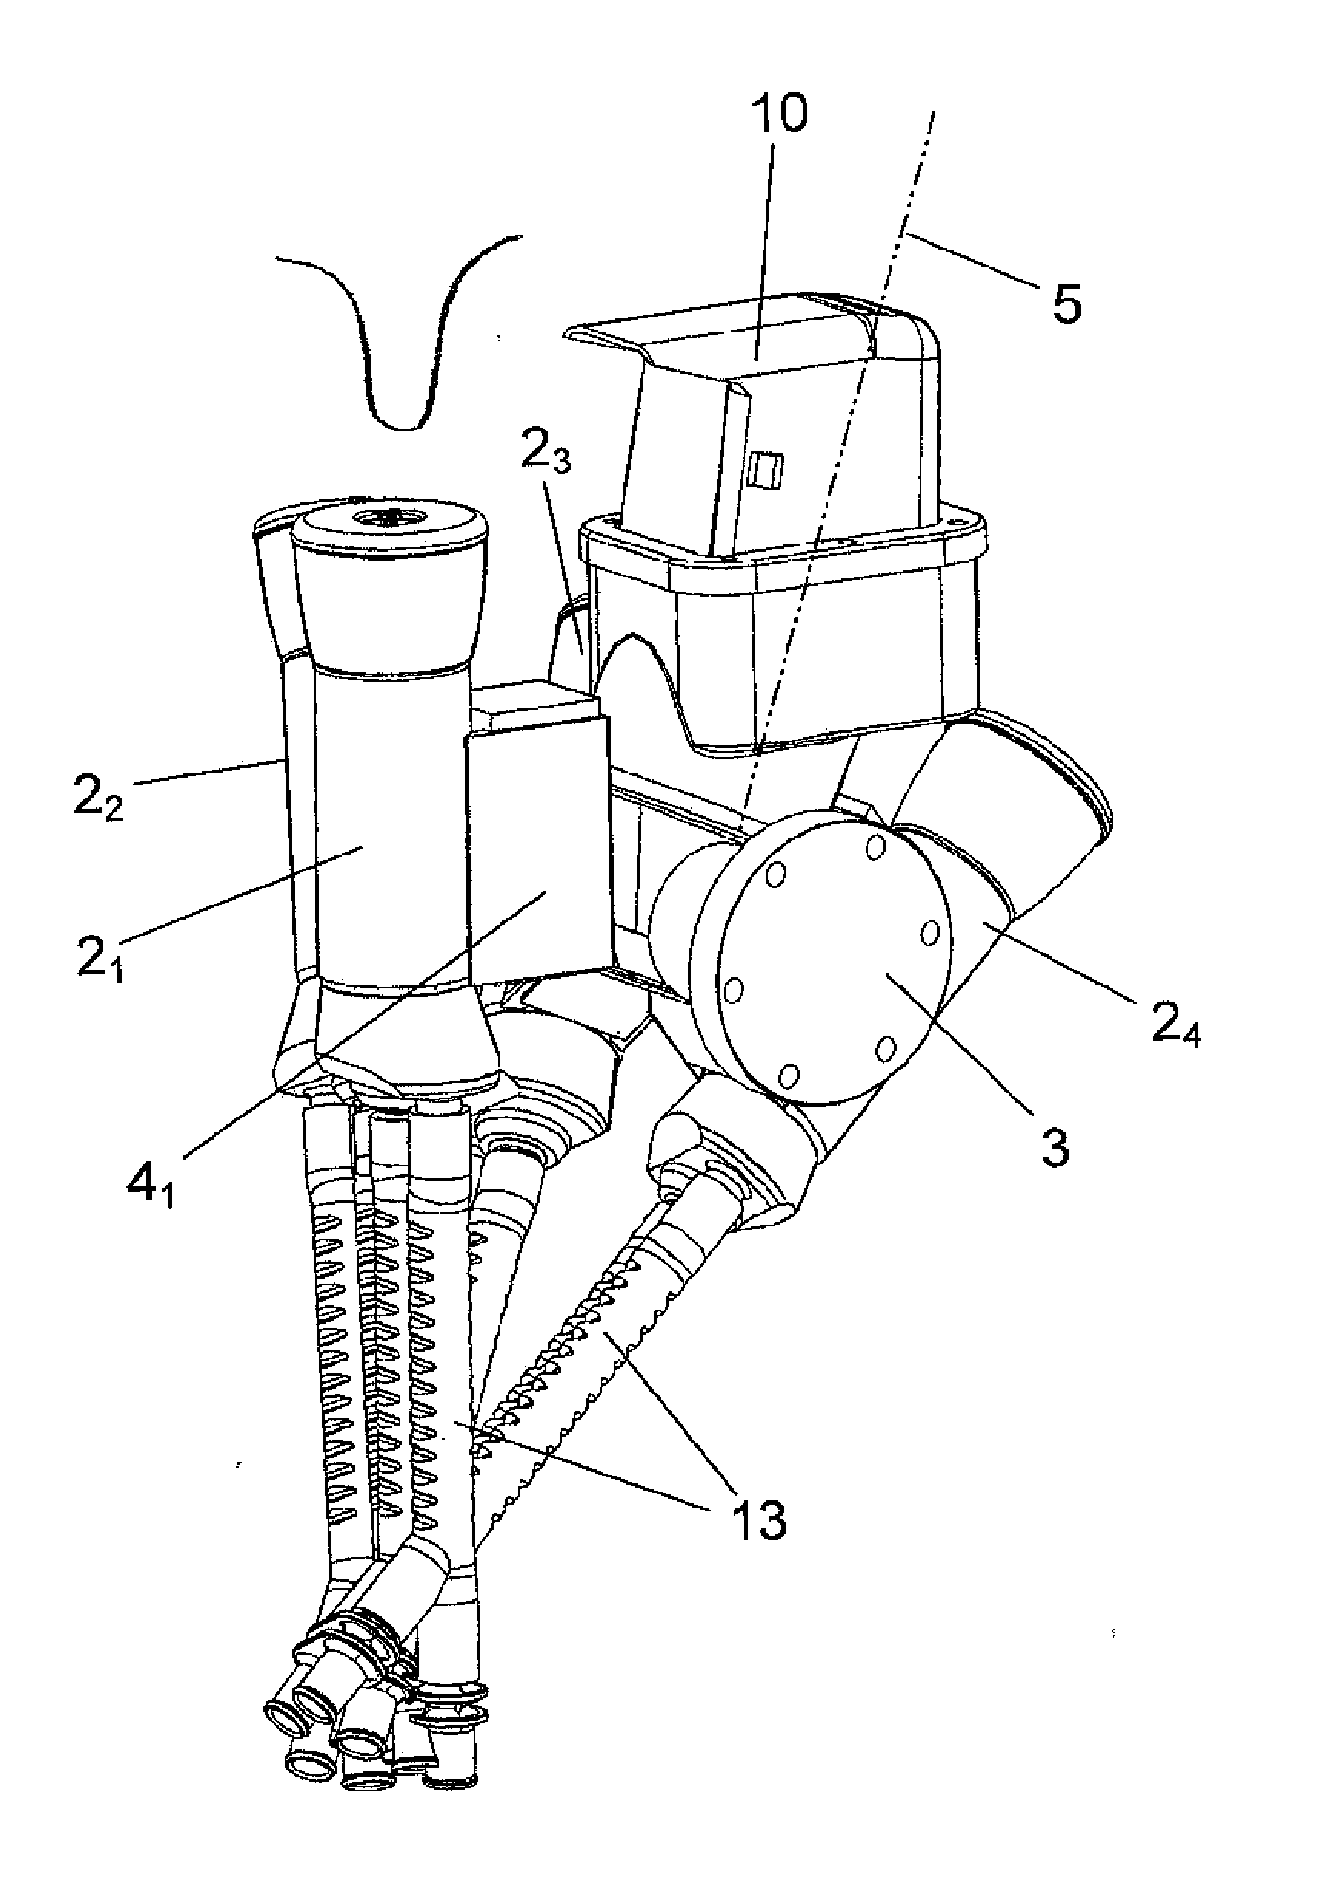 Teat cup handling device and a storing device for teat cups